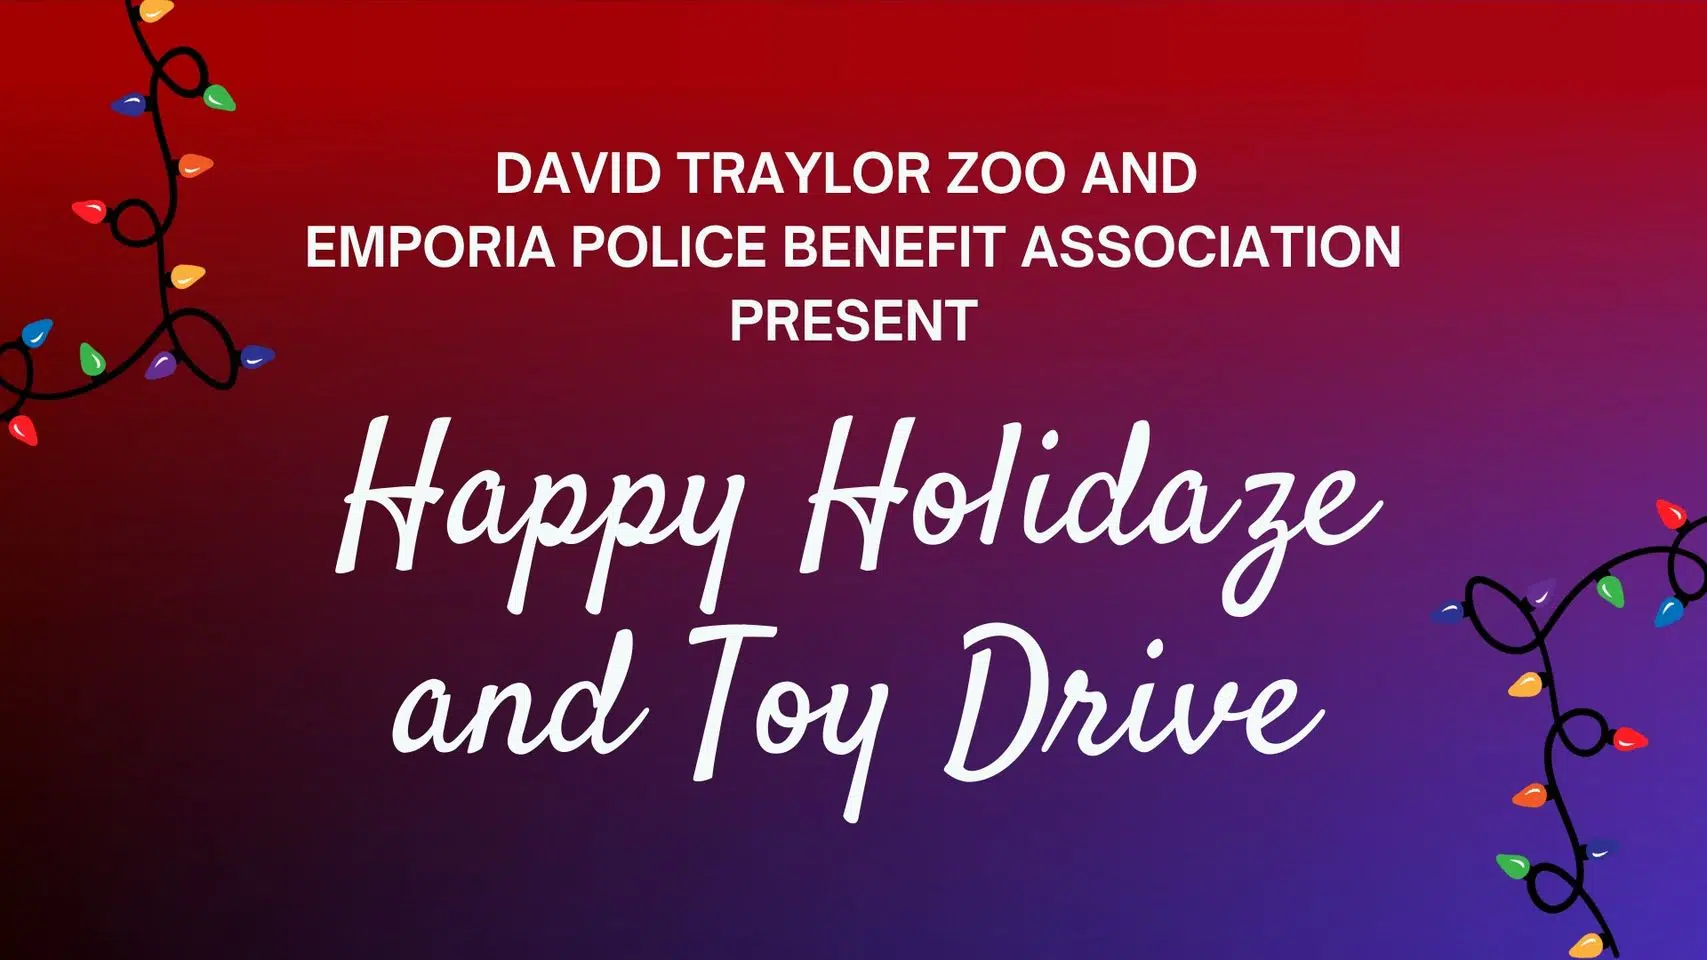 David Traylor Zoo, Emporia Police Benefit Association to partner on Happy Holidaze and Toy Drive